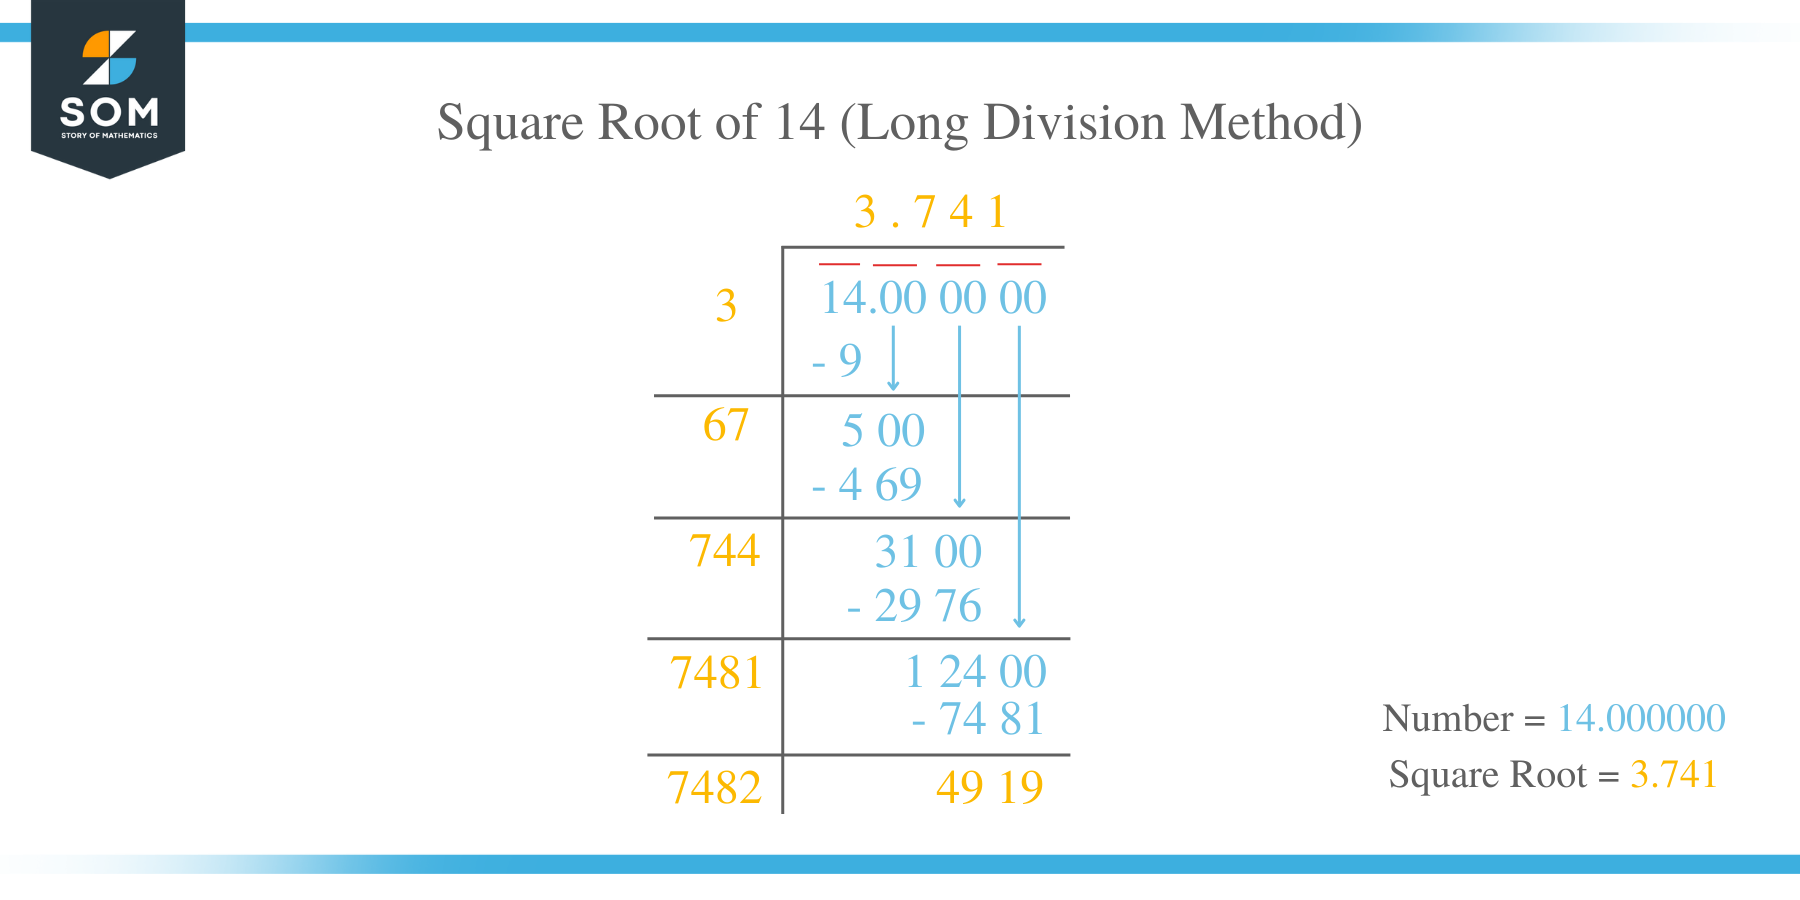 Square Root of 14 by Long Division Method